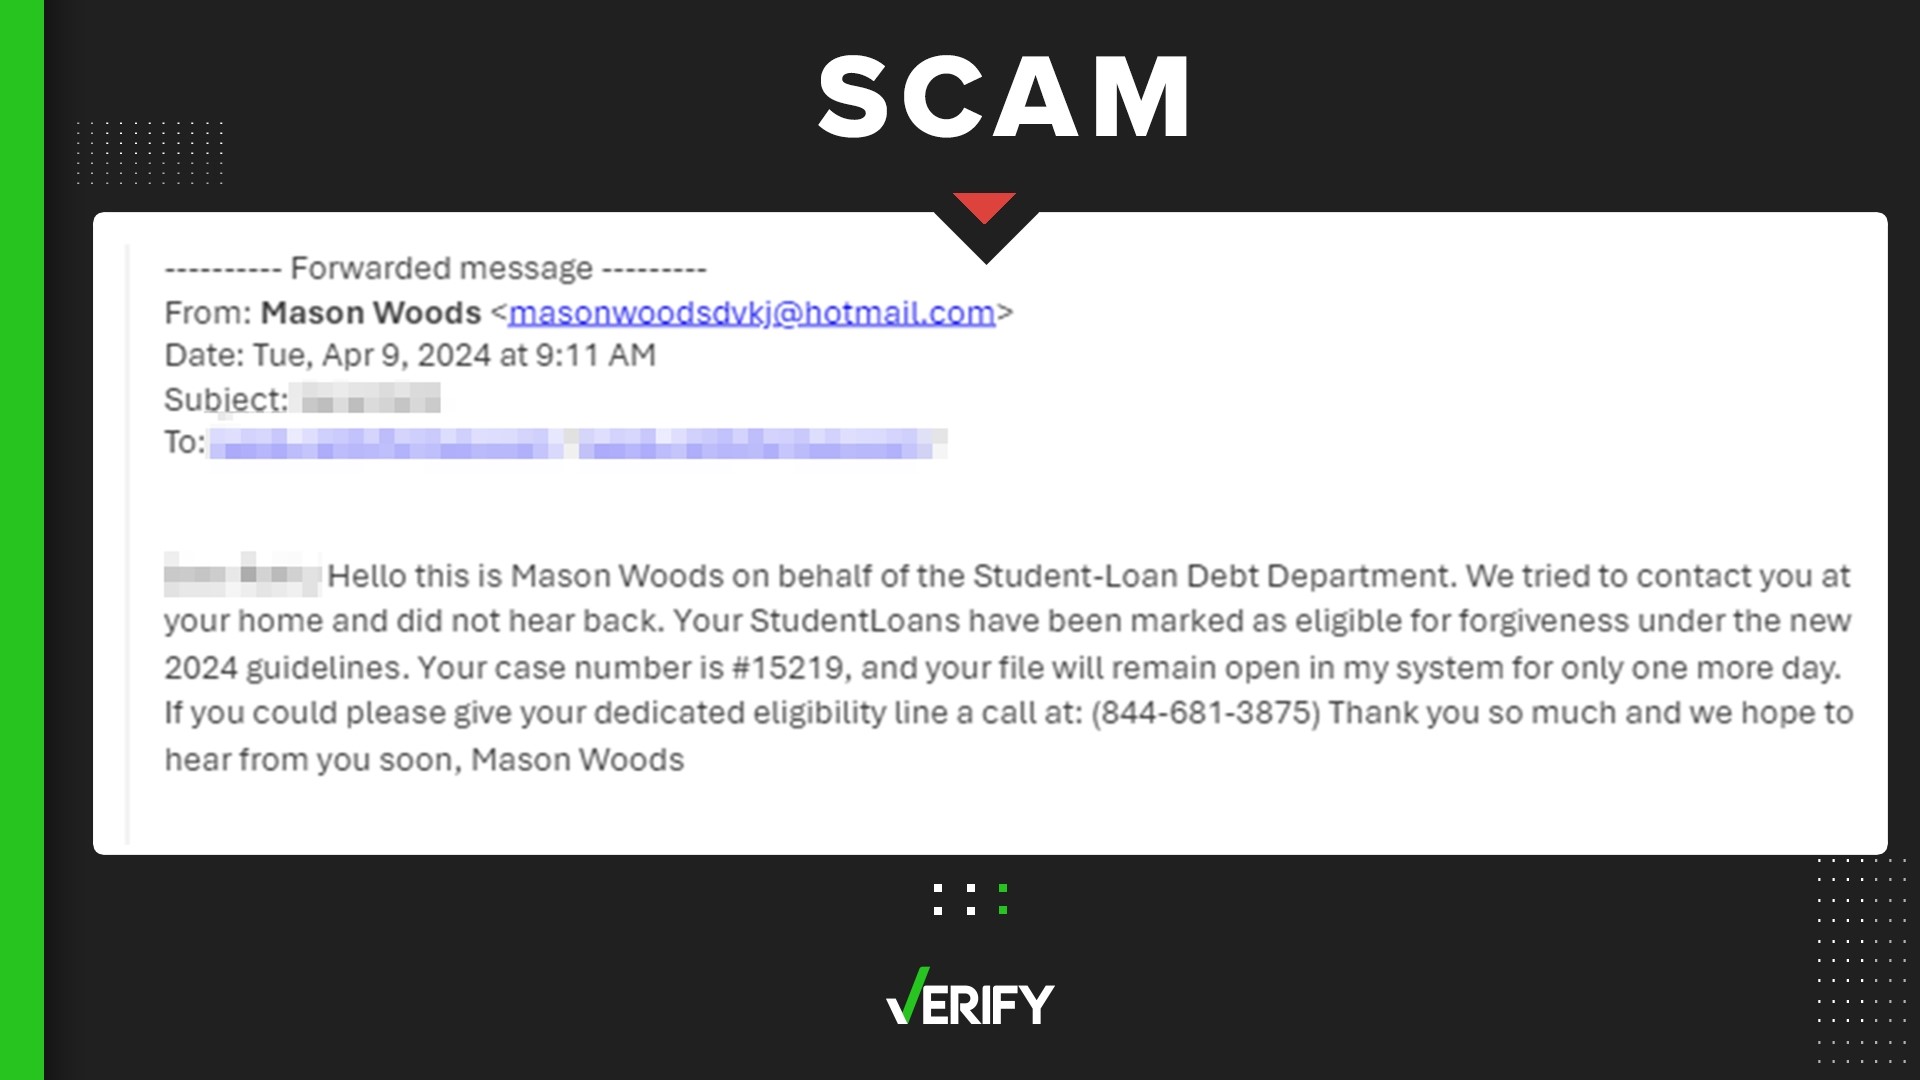 Did you get an email about debt relief from the “Student-Loan Debt Department” after the White House’s latest debt relief plan announcement? Here’s why it’s a scam.